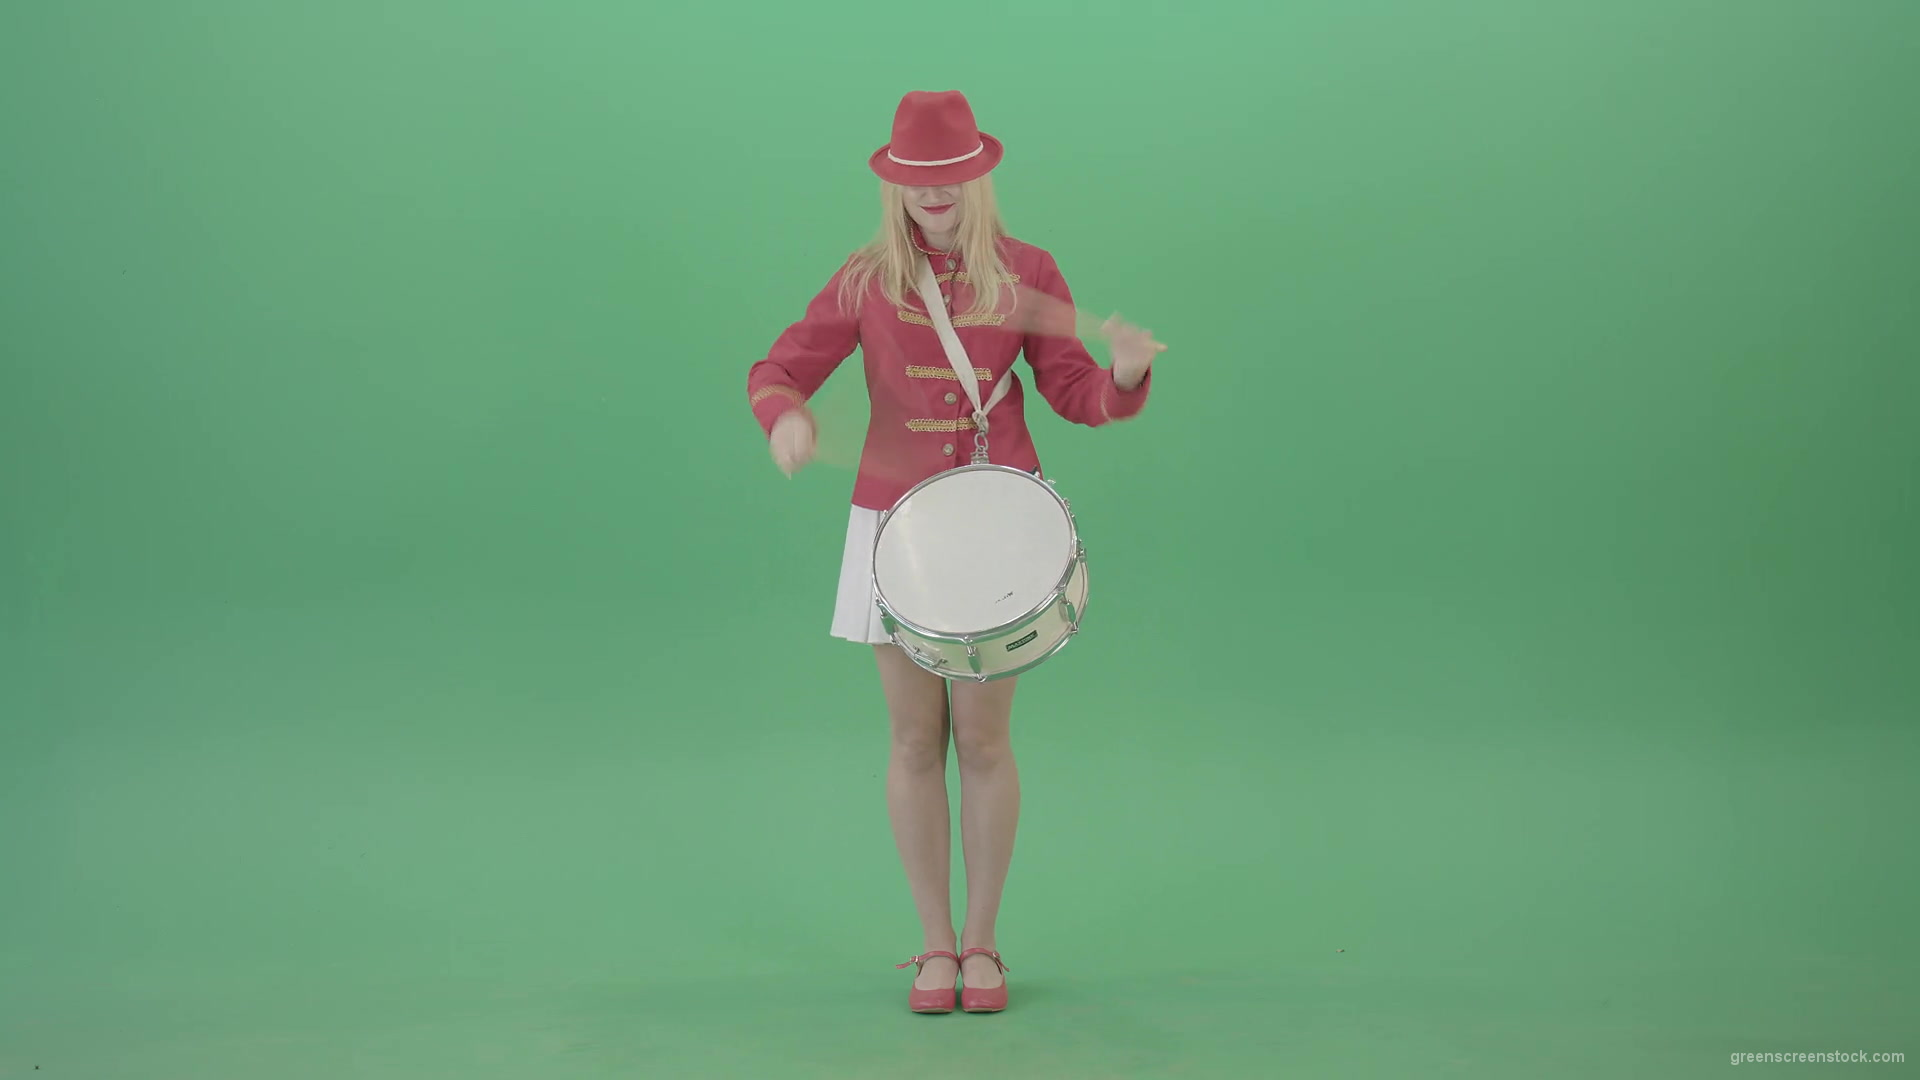 Blonde-woman-in-military-celebration-uniform-play-snare-drum-isolated-on-green-screen-4K-Video-footage-1920_007 Green Screen Stock